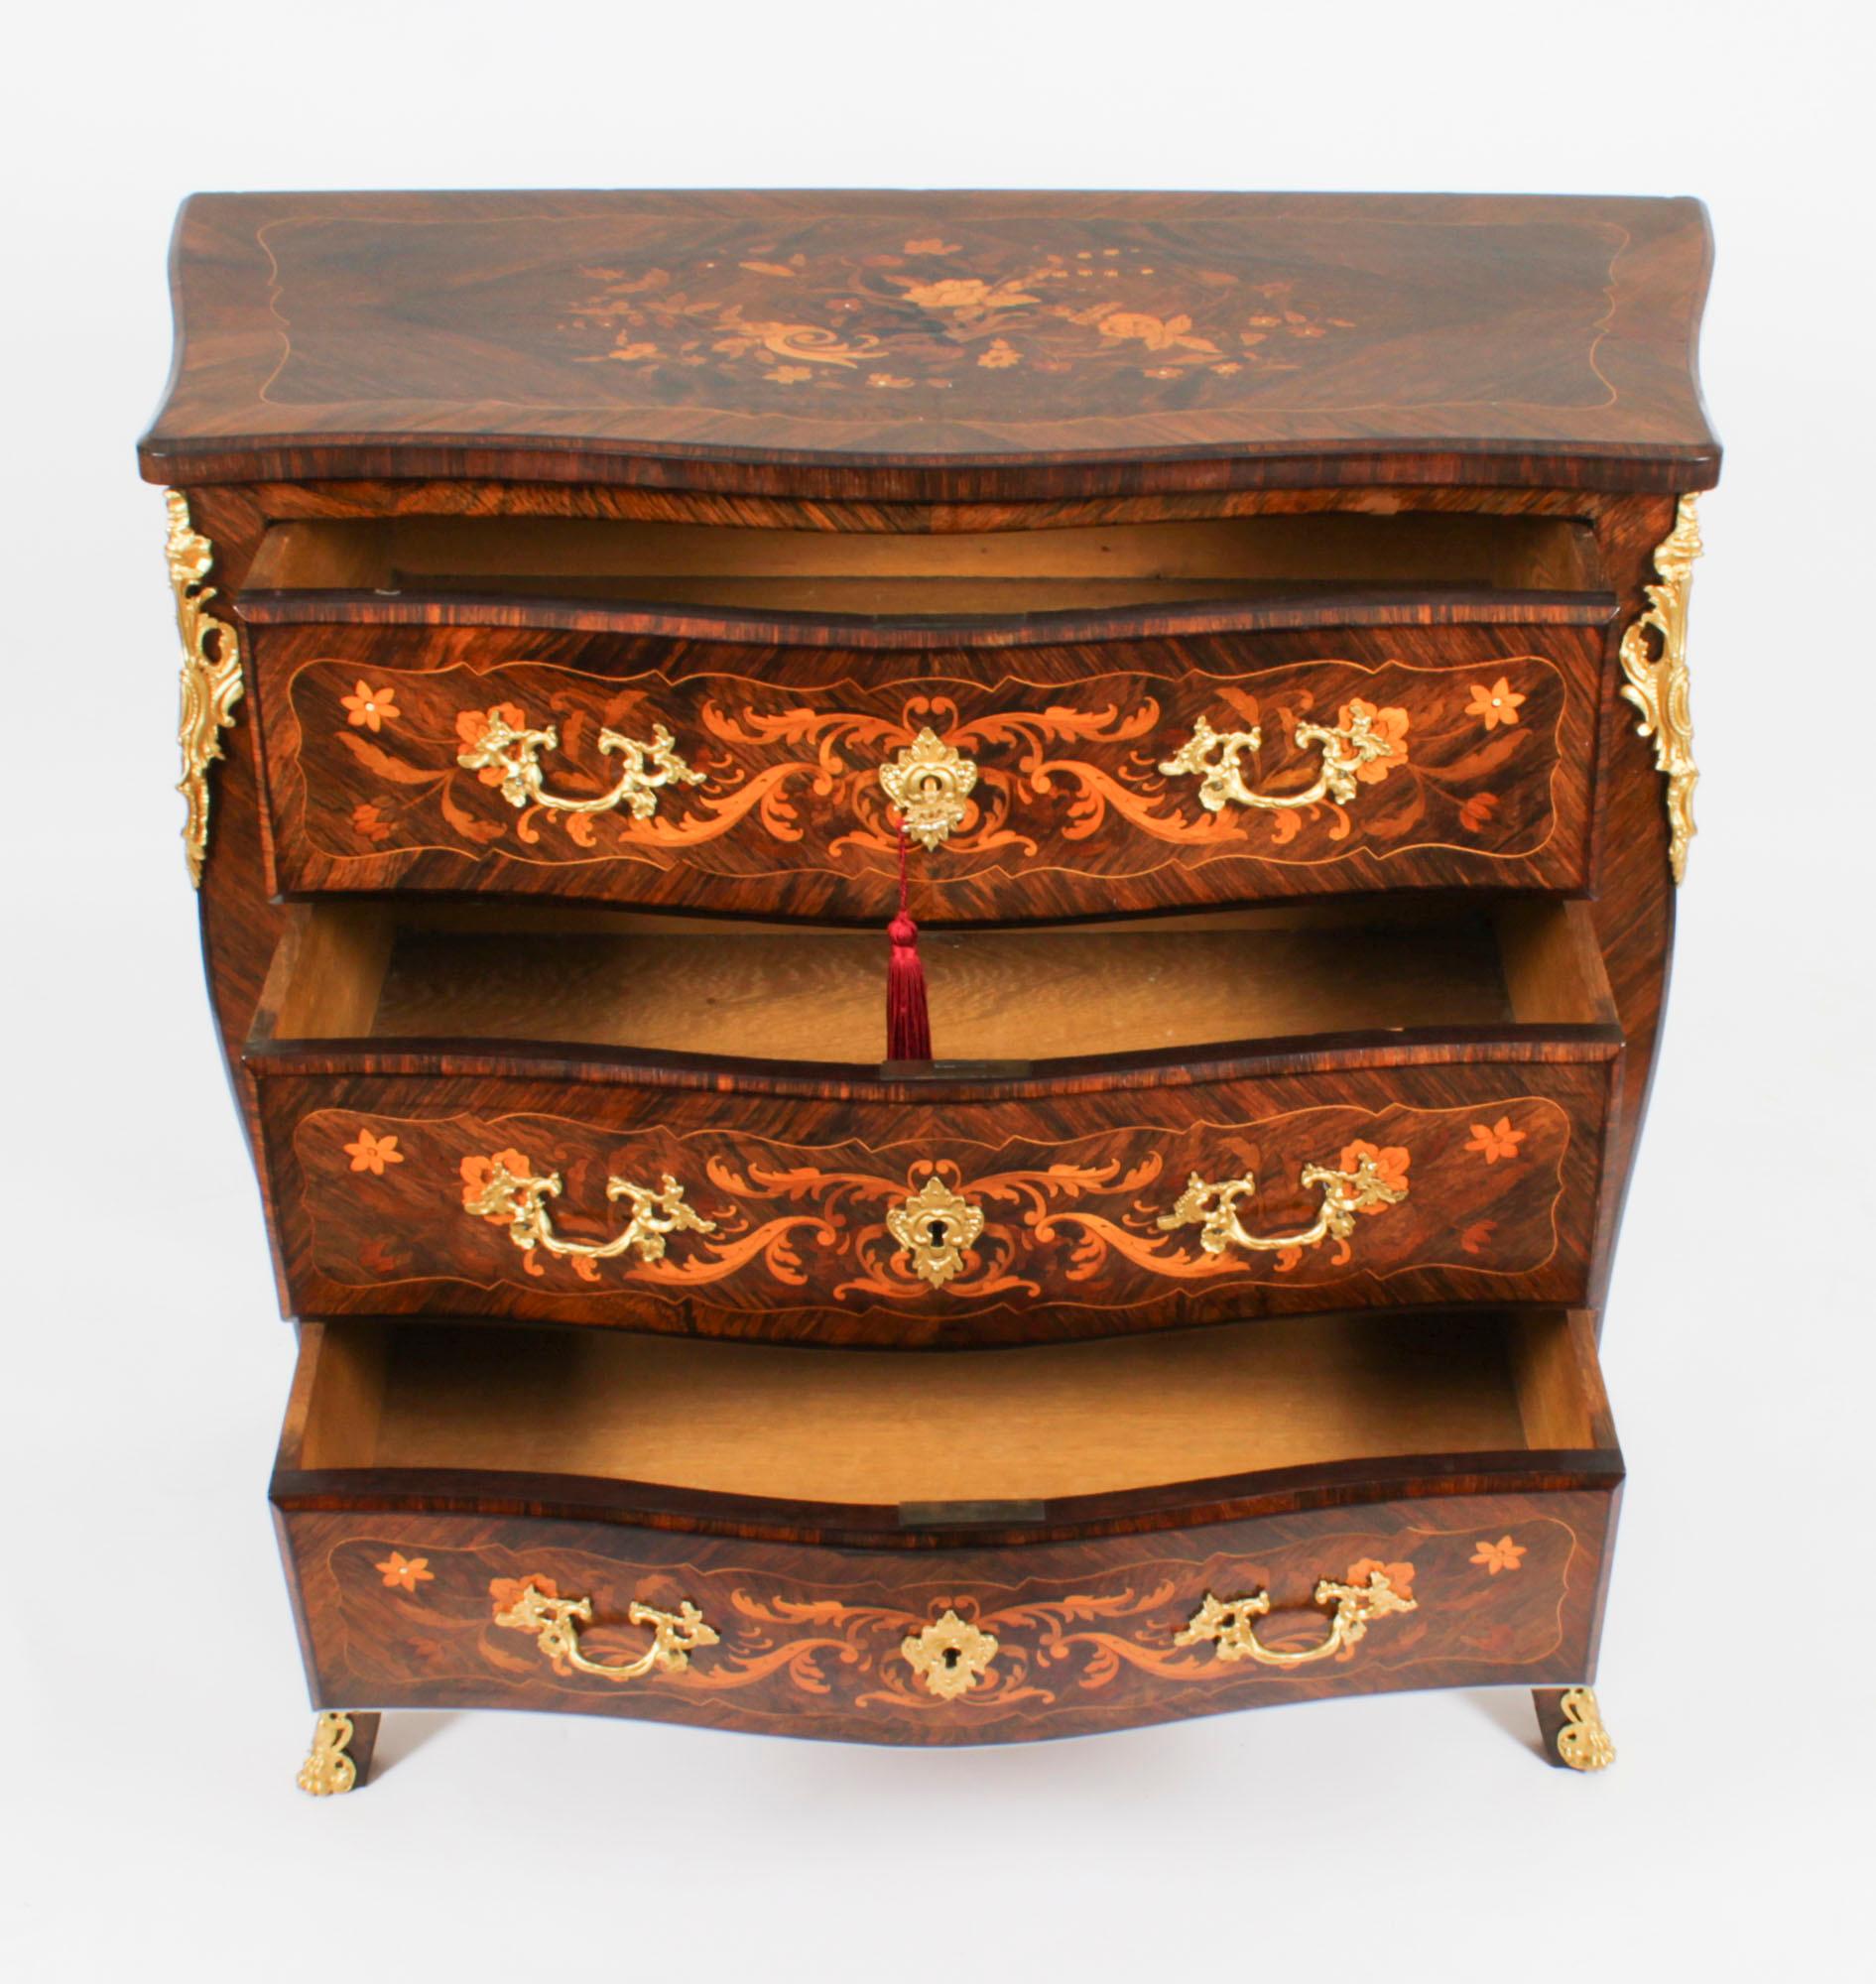 Antique French Louis Revival Marquetry Commode Chest of Drawers 19th Century For Sale 12